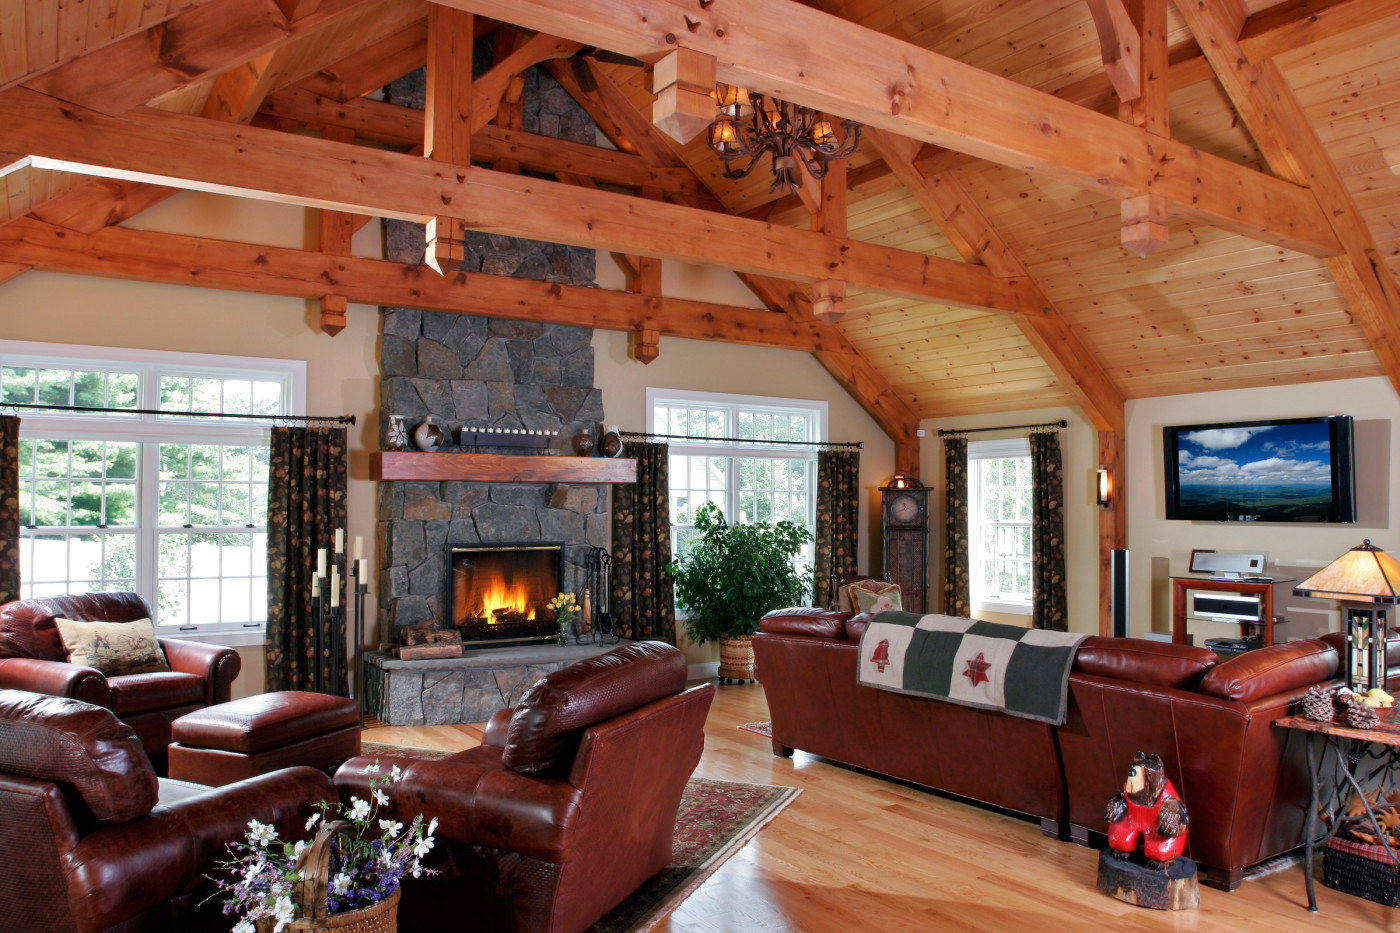 Teakwood Builders designed this great room to resemble a rustic Adirondack lodge, with abundant natural materials and a Rumford fireplace. A bluestone slab tops the raised hearth, while 4-5” thick split-stone veneer surrounds the fireplace and is carried to the ceiling. A rustic-style beam serving as the mantle complements the new timber trusses and posts.